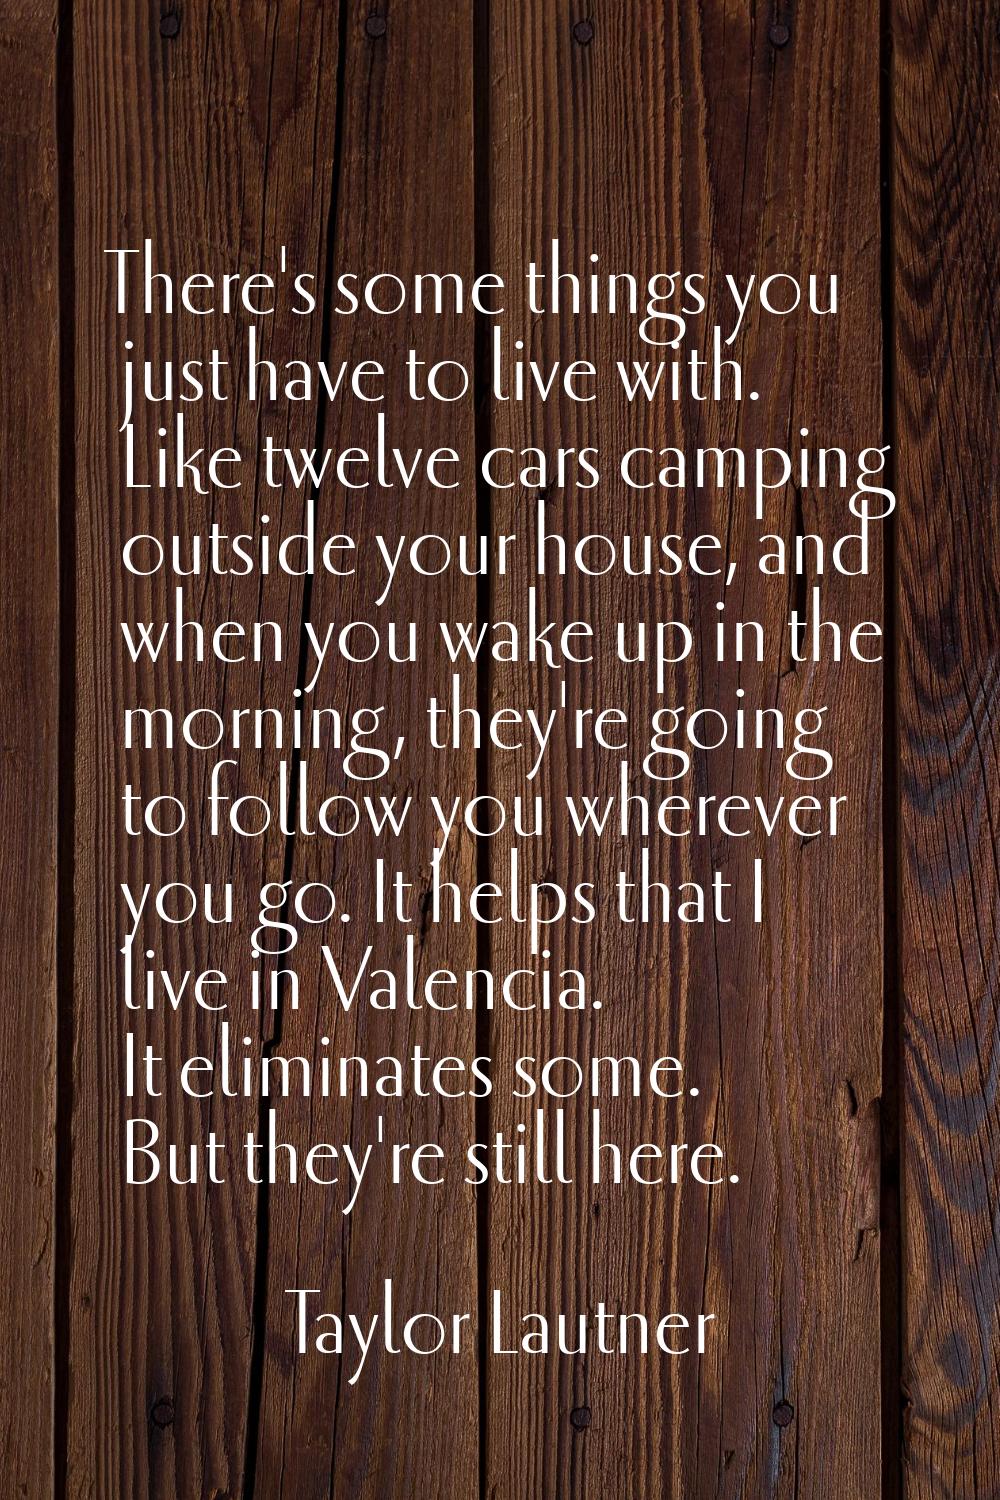 There's some things you just have to live with. Like twelve cars camping outside your house, and wh